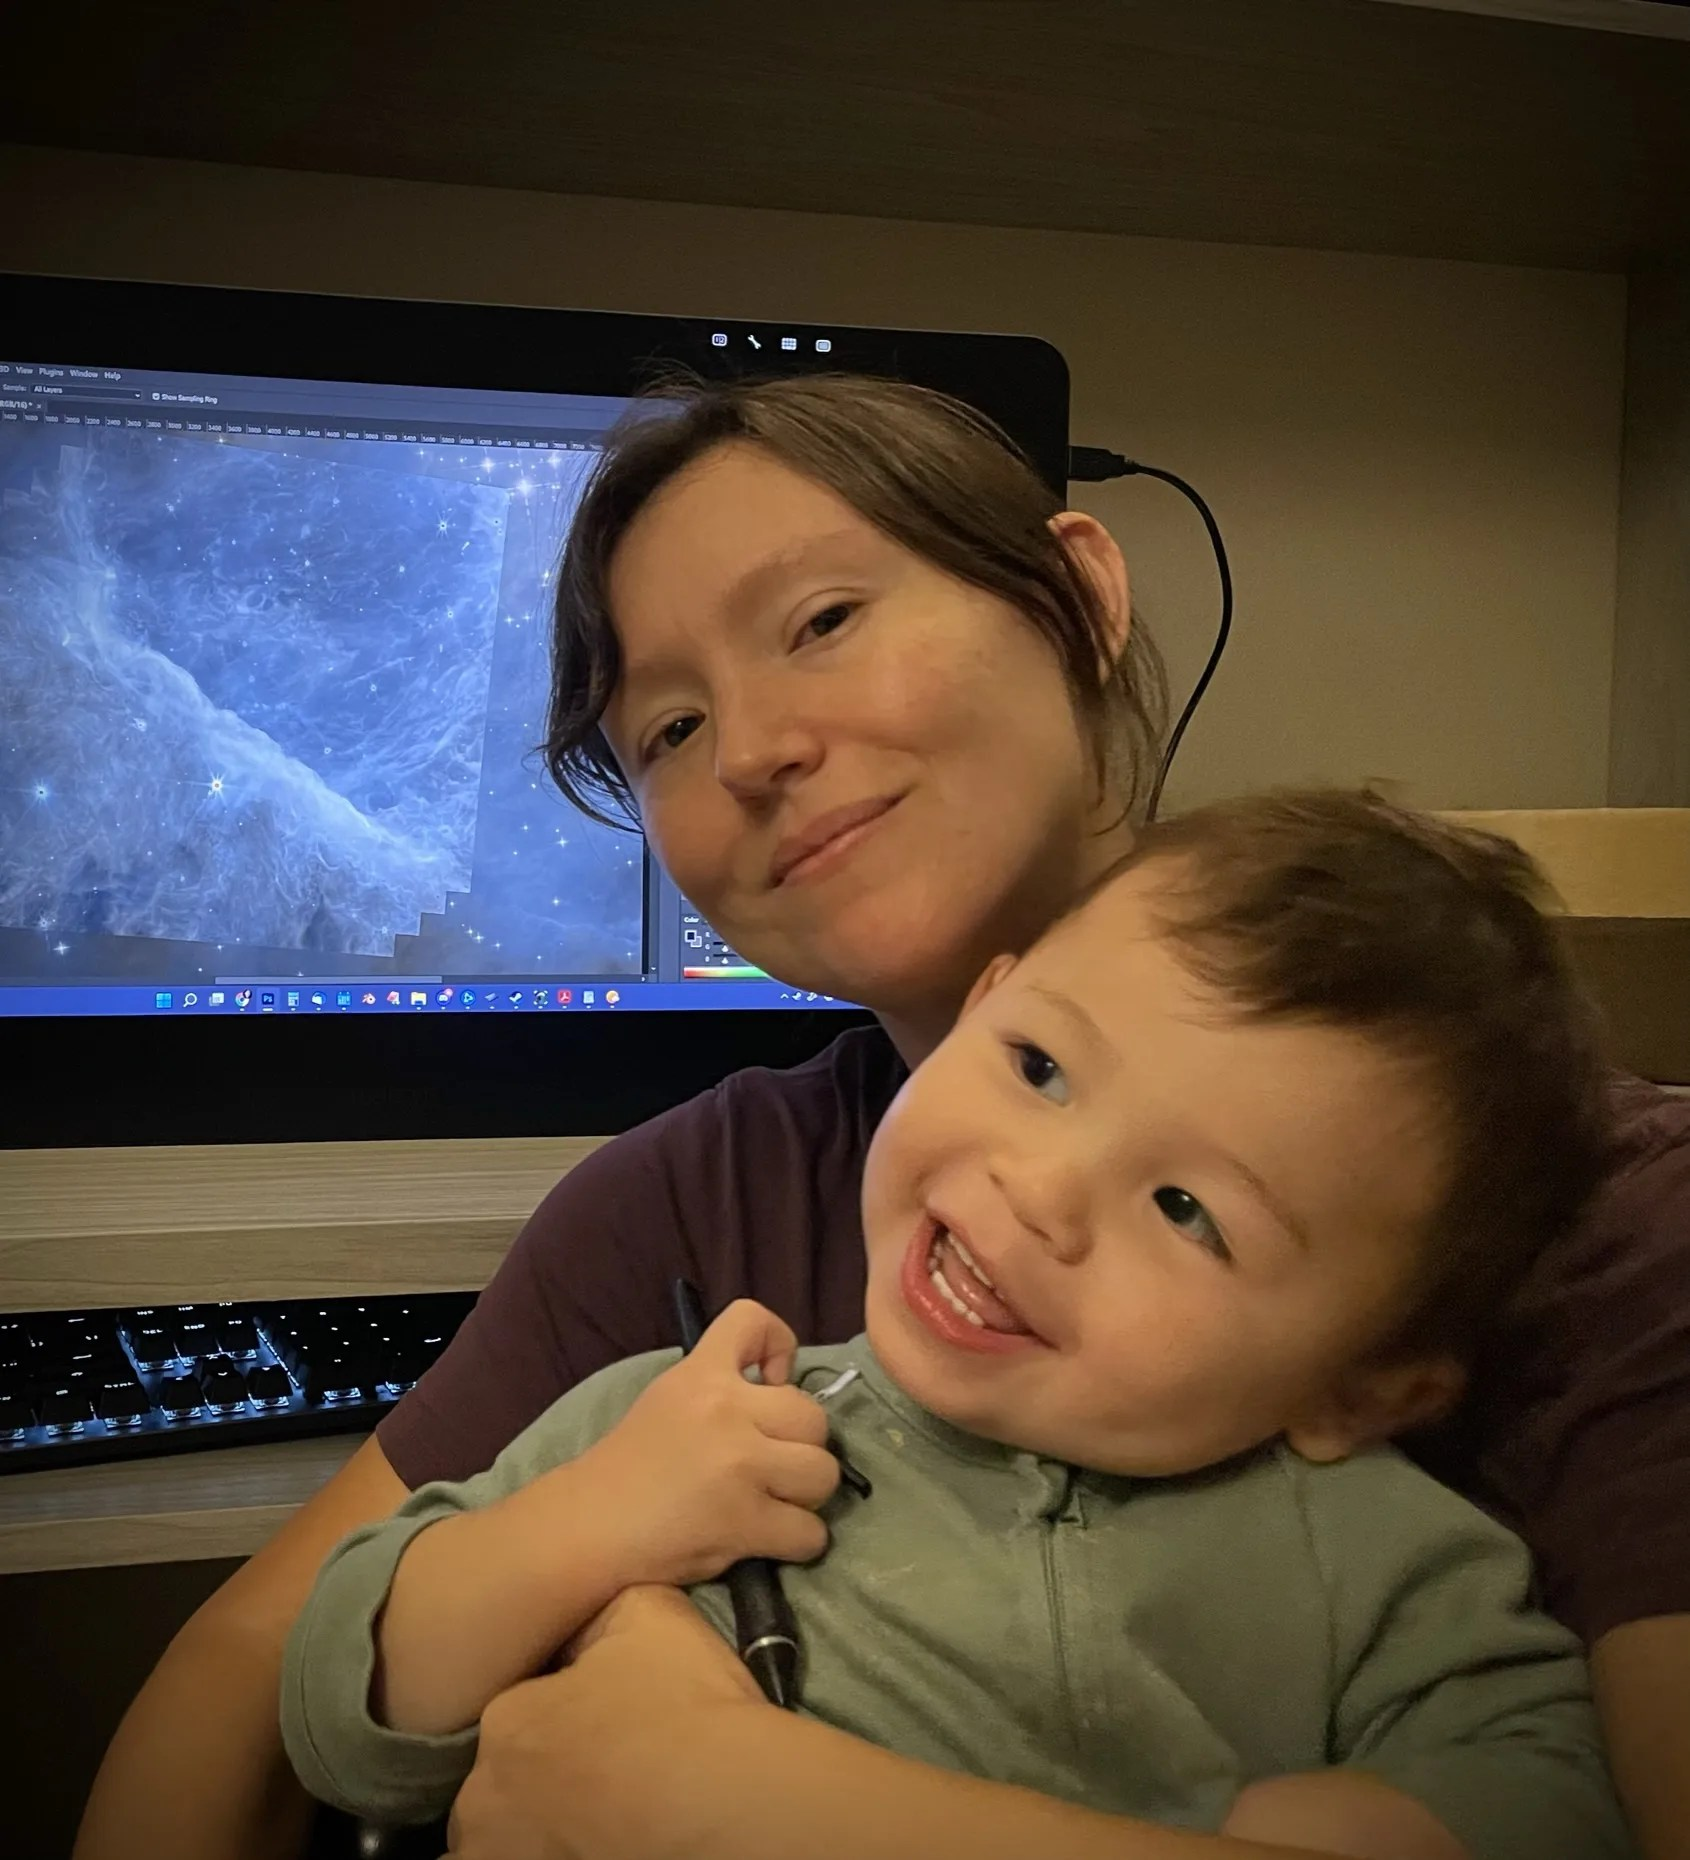 Photo of a smiling woman holding a smiling toddler, a computer screen displaying James Webb Space Telescope imagery is in the background.